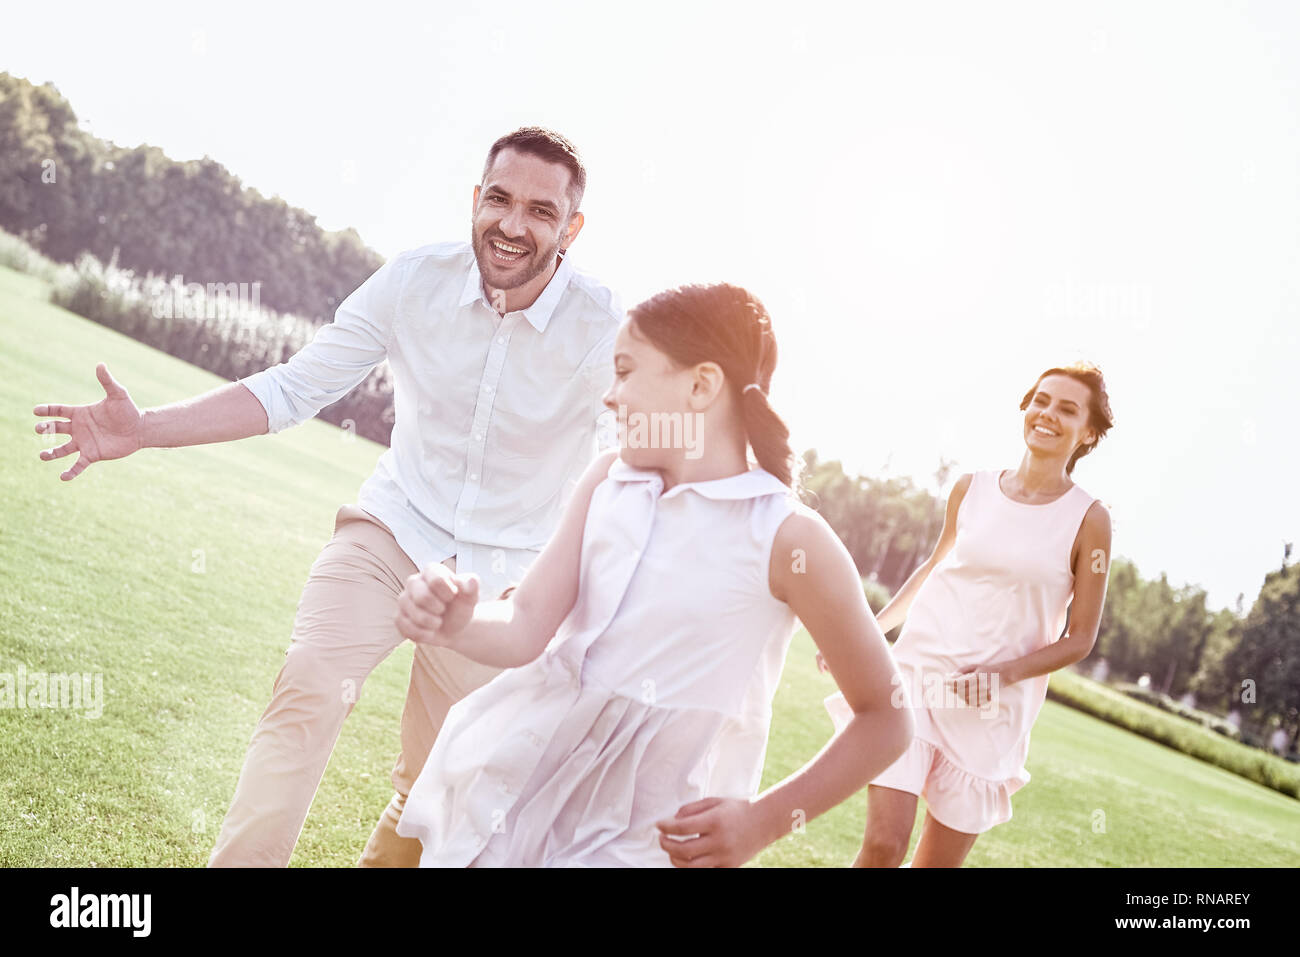 Bonding. Family of three running on grassy field playing playing touch and run game smiling playful Stock Photo